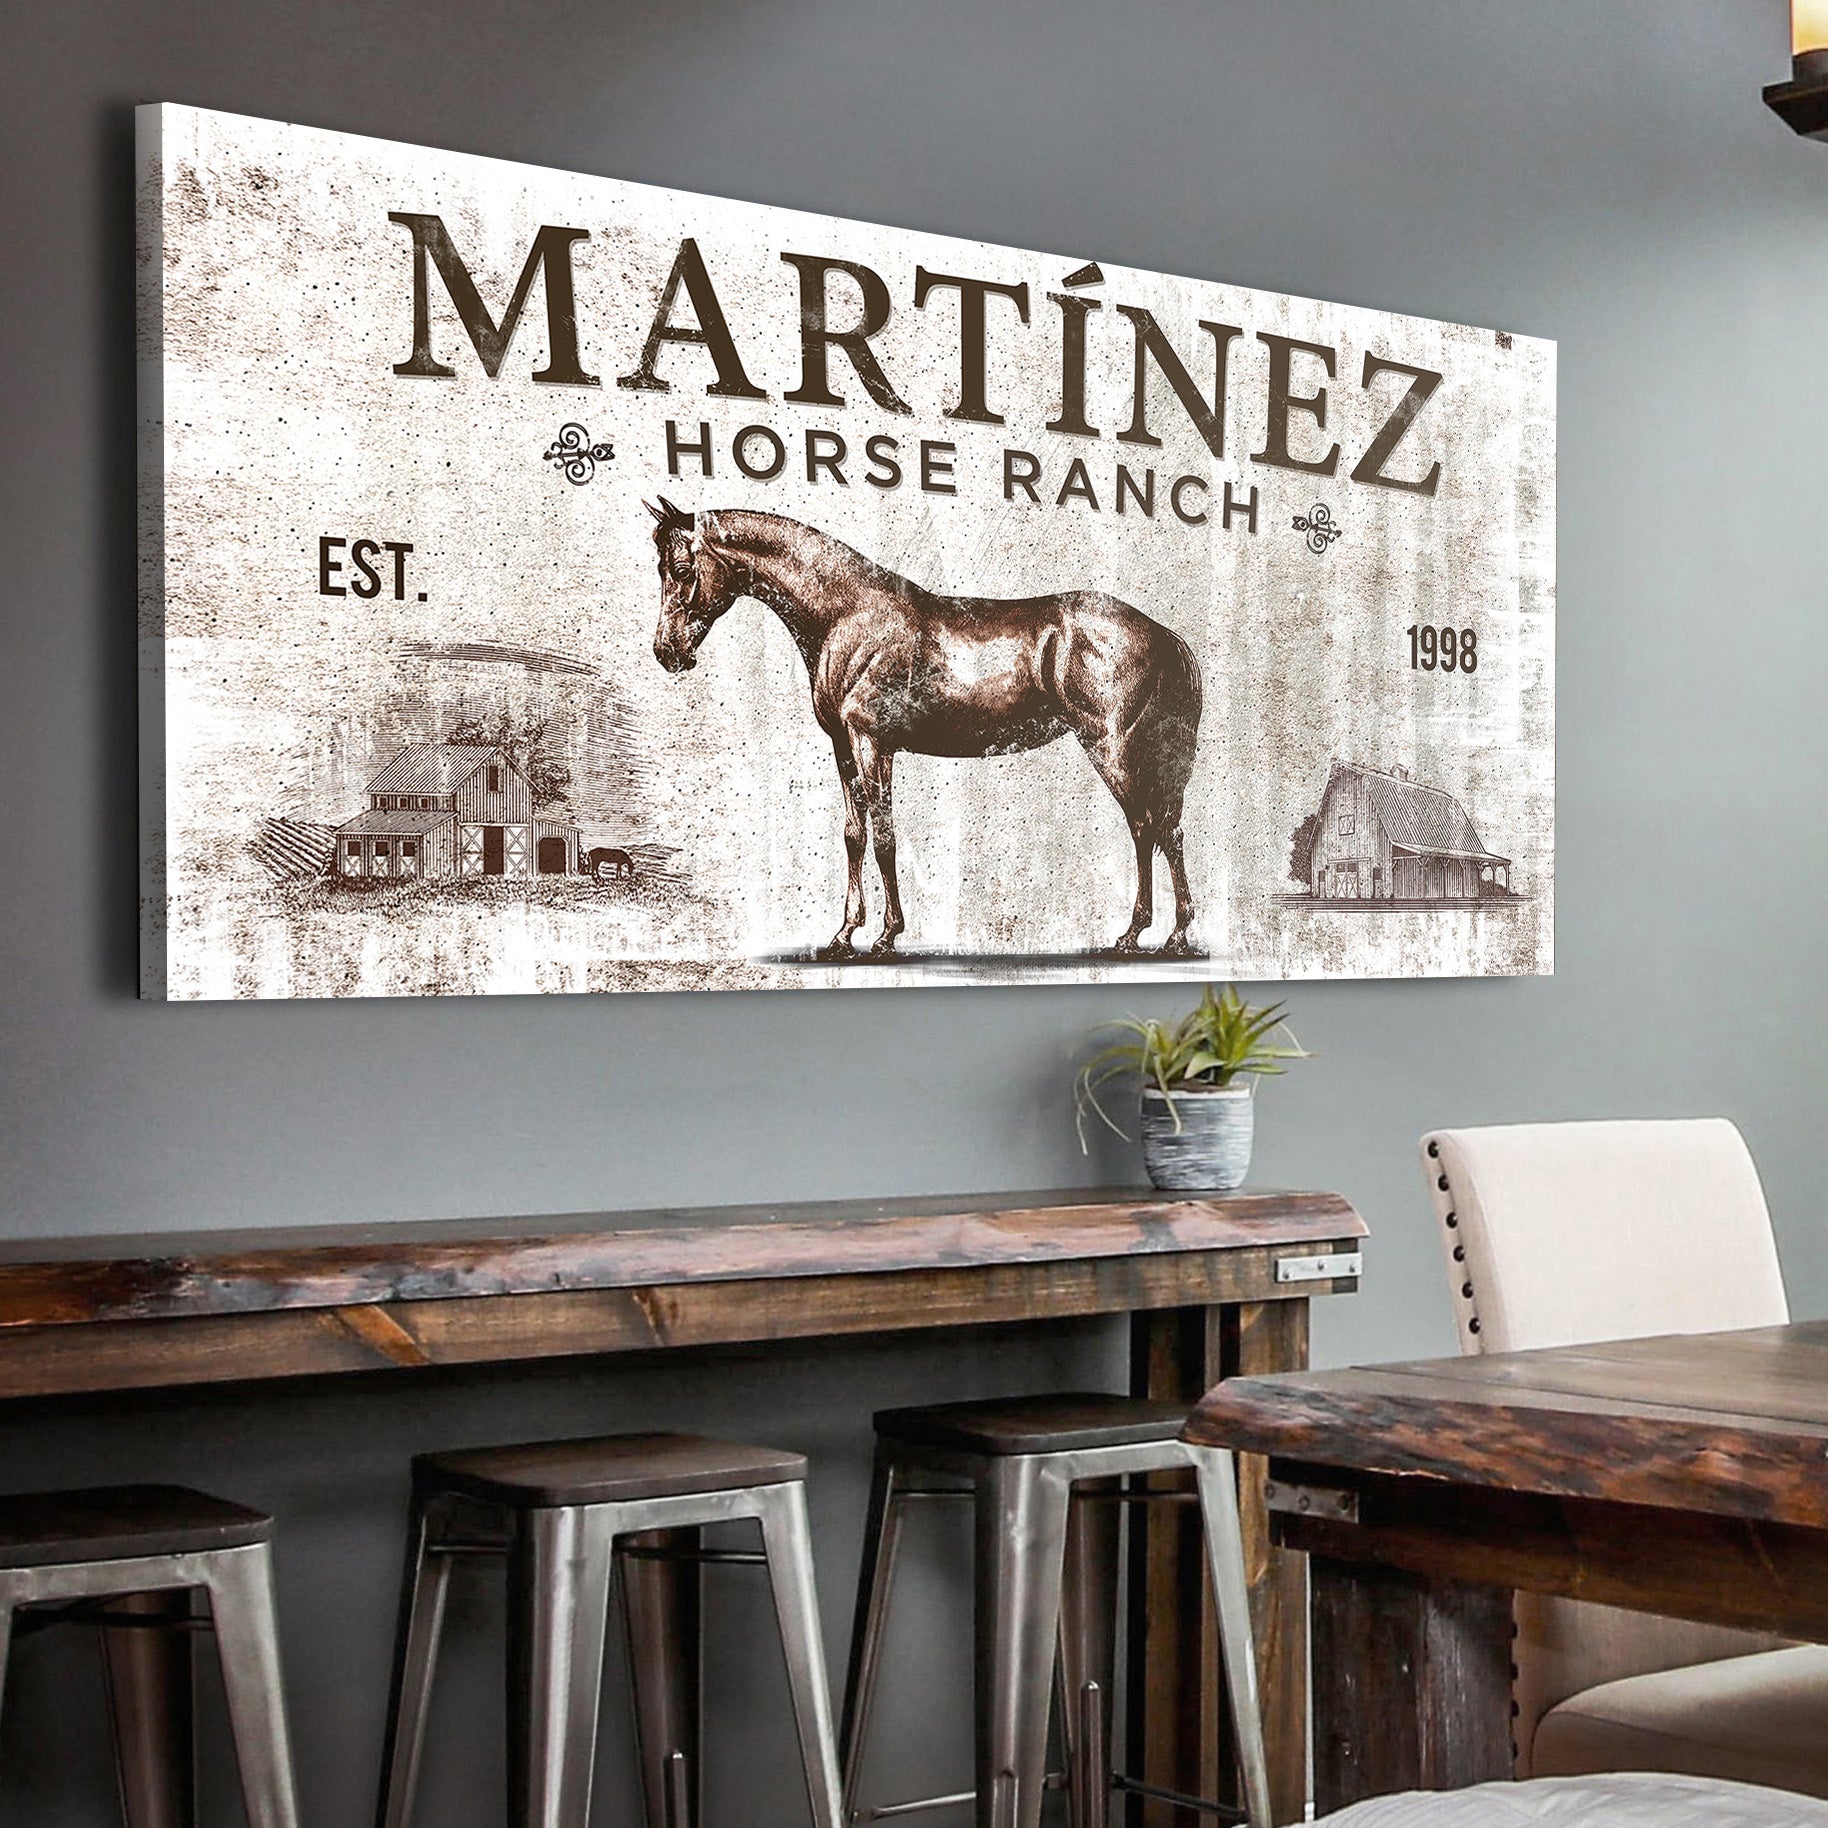 Vintage Horse Ranch Sign - Image by Tailored Canvases